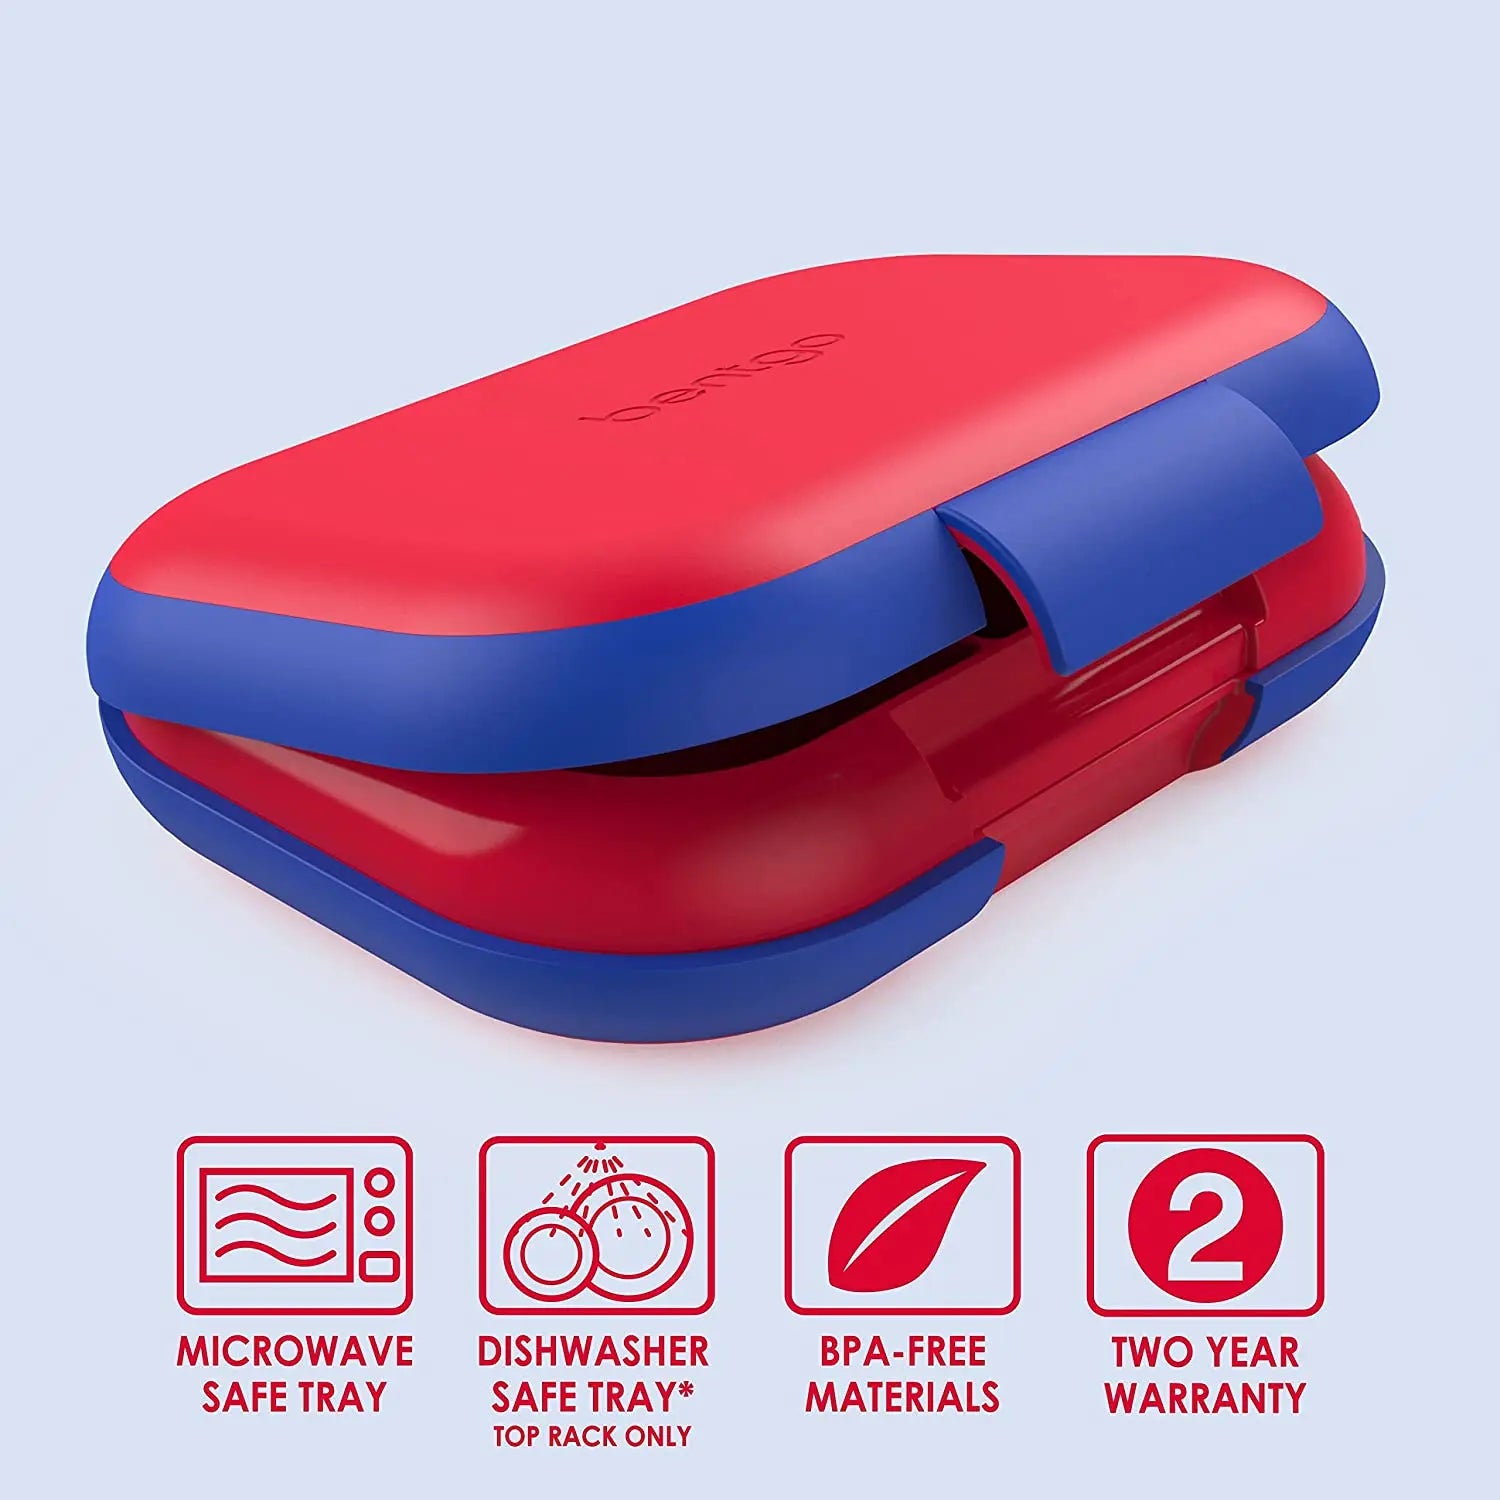 Bentgo® Kids Chill Lunch Box - with Removable Ice Pack (Red